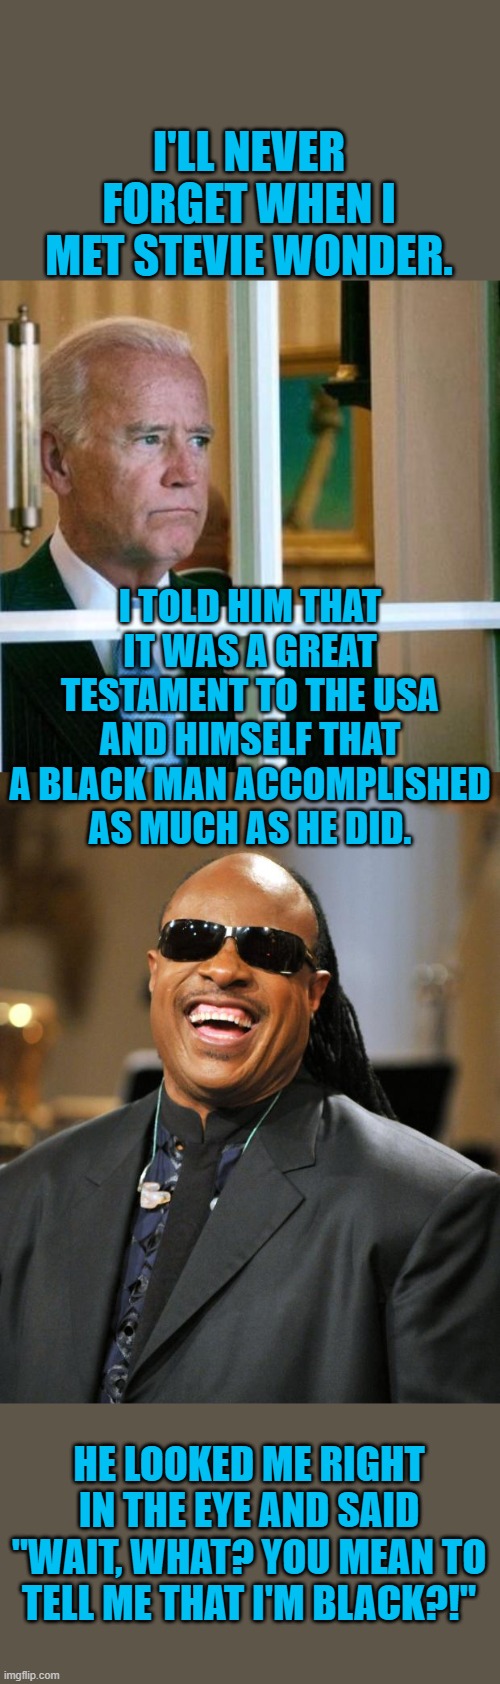 Joe had to break it to him. | I'LL NEVER FORGET WHEN I MET STEVIE WONDER. I TOLD HIM THAT IT WAS A GREAT TESTAMENT TO THE USA AND HIMSELF THAT A BLACK MAN ACCOMPLISHED AS MUCH AS HE DID. HE LOOKED ME RIGHT IN THE EYE AND SAID "WAIT, WHAT? YOU MEAN TO TELL ME THAT I'M BLACK?!" | image tagged in stevie wonder,sad joe biden,black | made w/ Imgflip meme maker